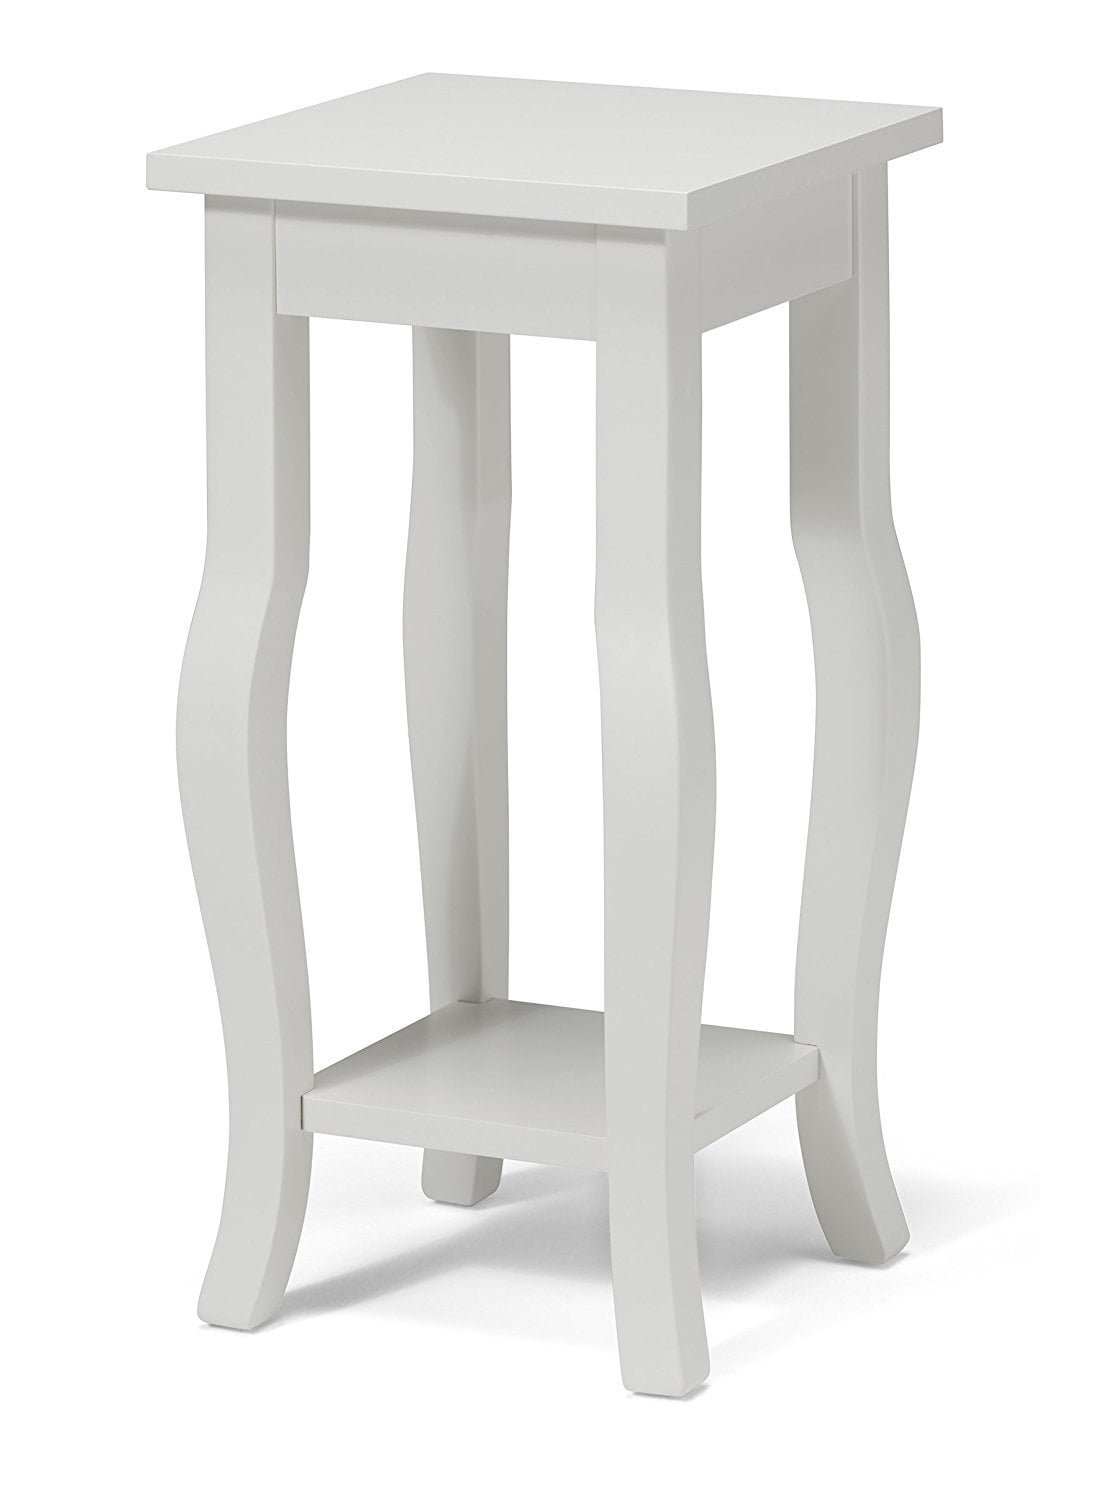 Kate and Laurel Lillian Wood Pedestal End Table Curved Legs with Shelf, 12" x 12" x 24", True